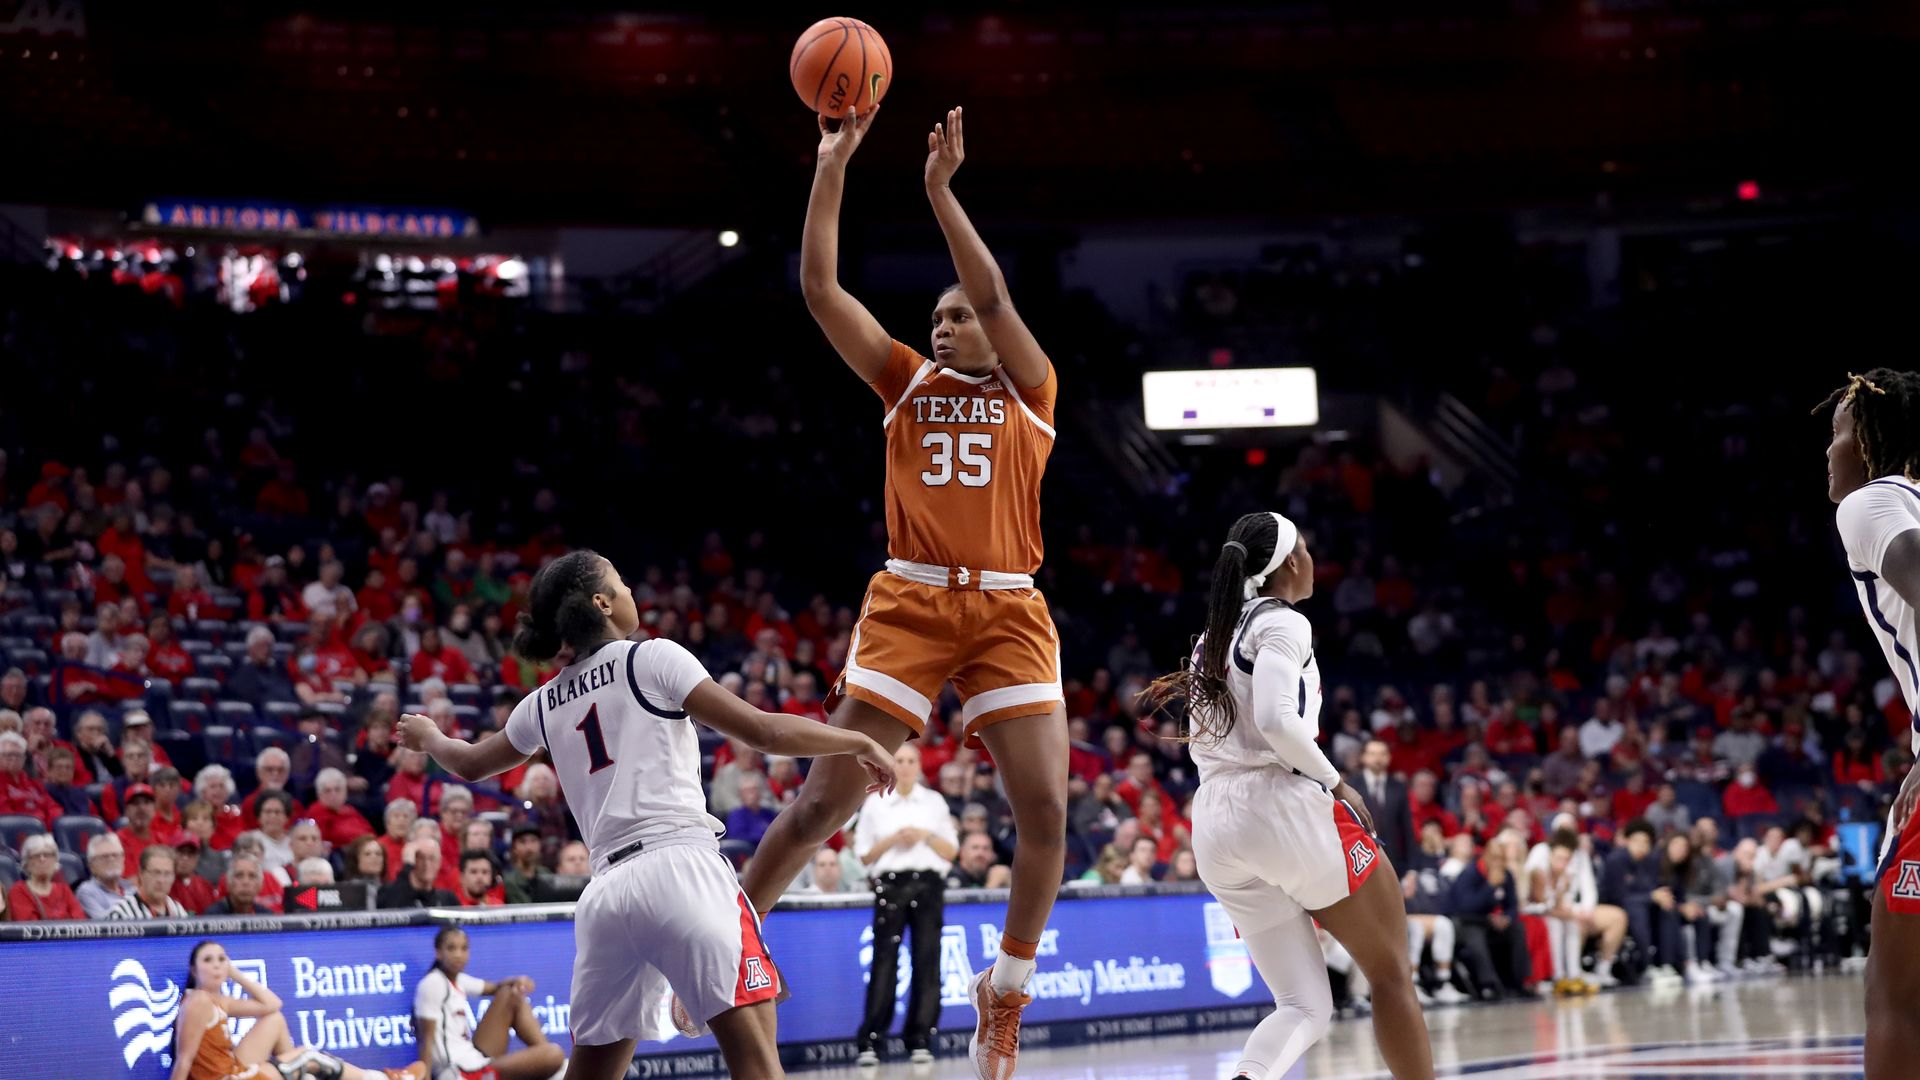 A University of Texas basketball player shoots the ball over a defender.